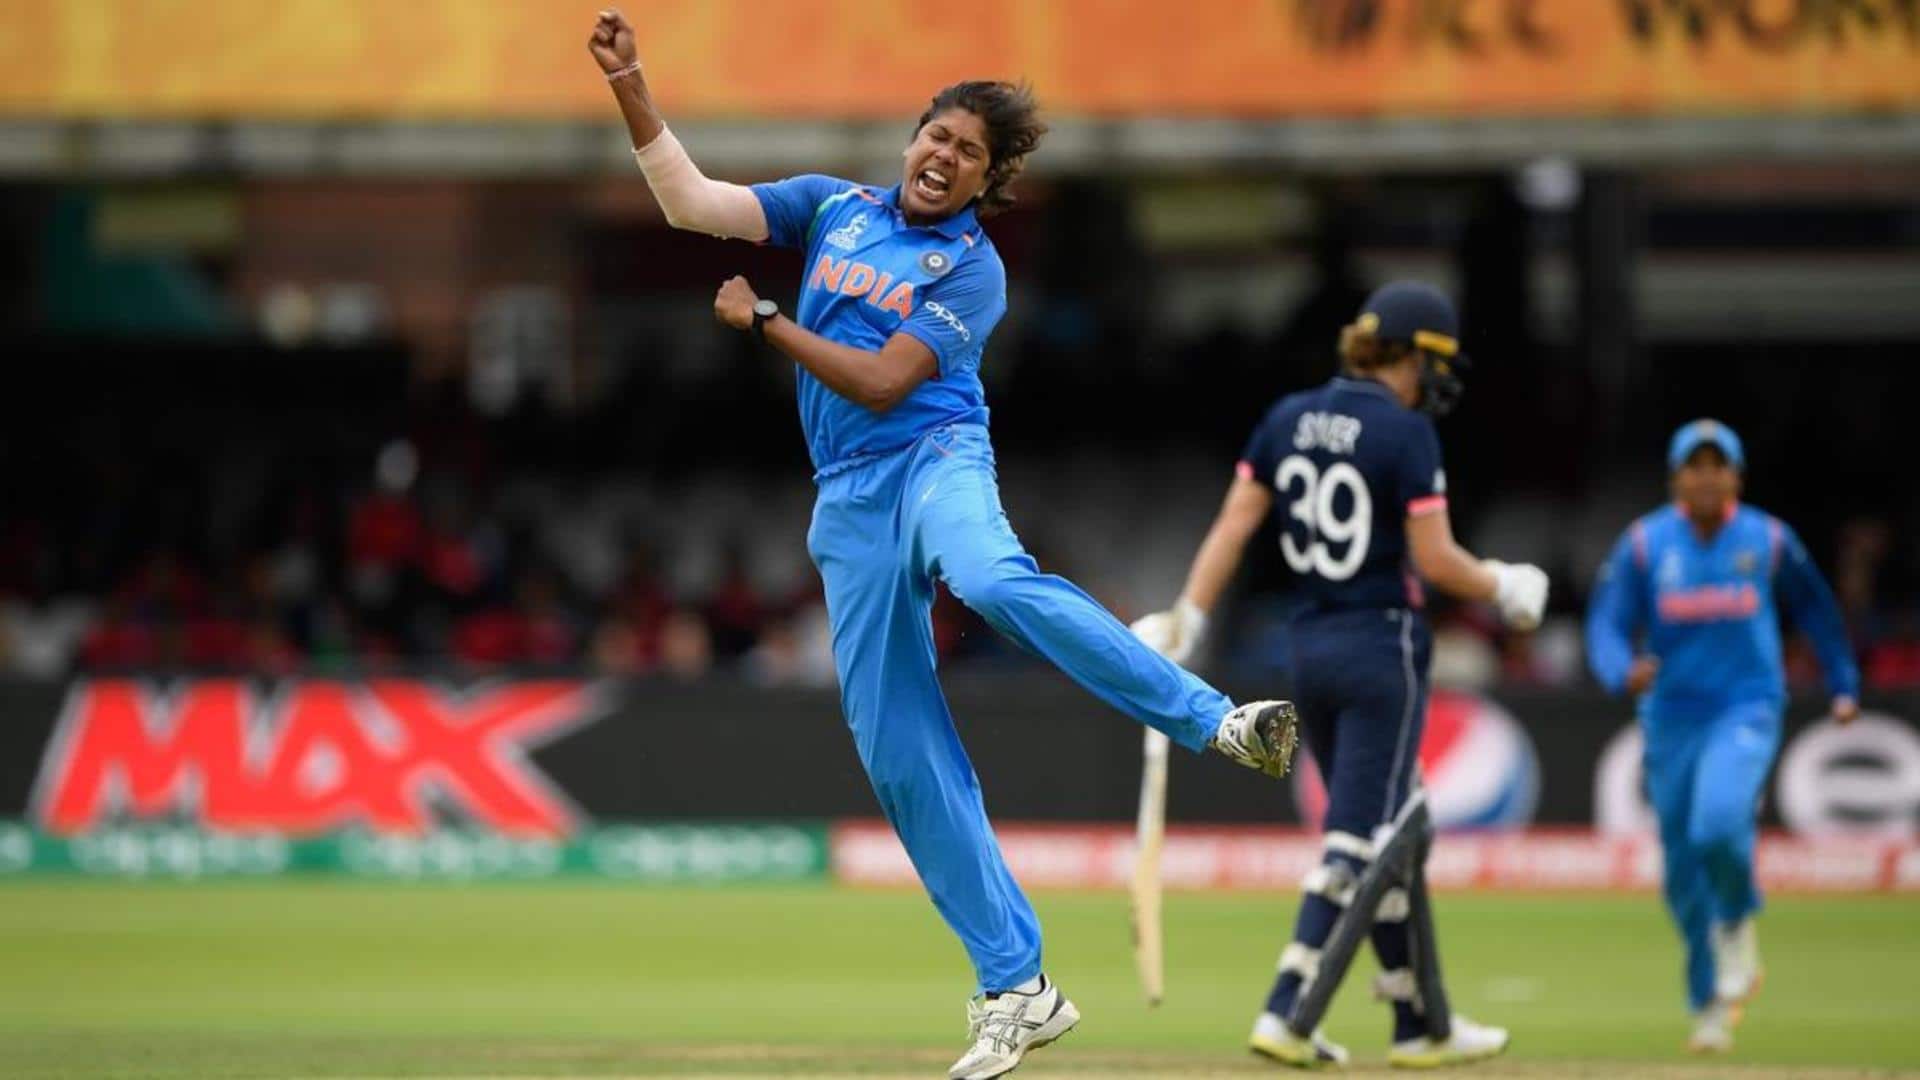 Jhulan Goswami, Eoin Morgan included in MCC World Cricket Committee